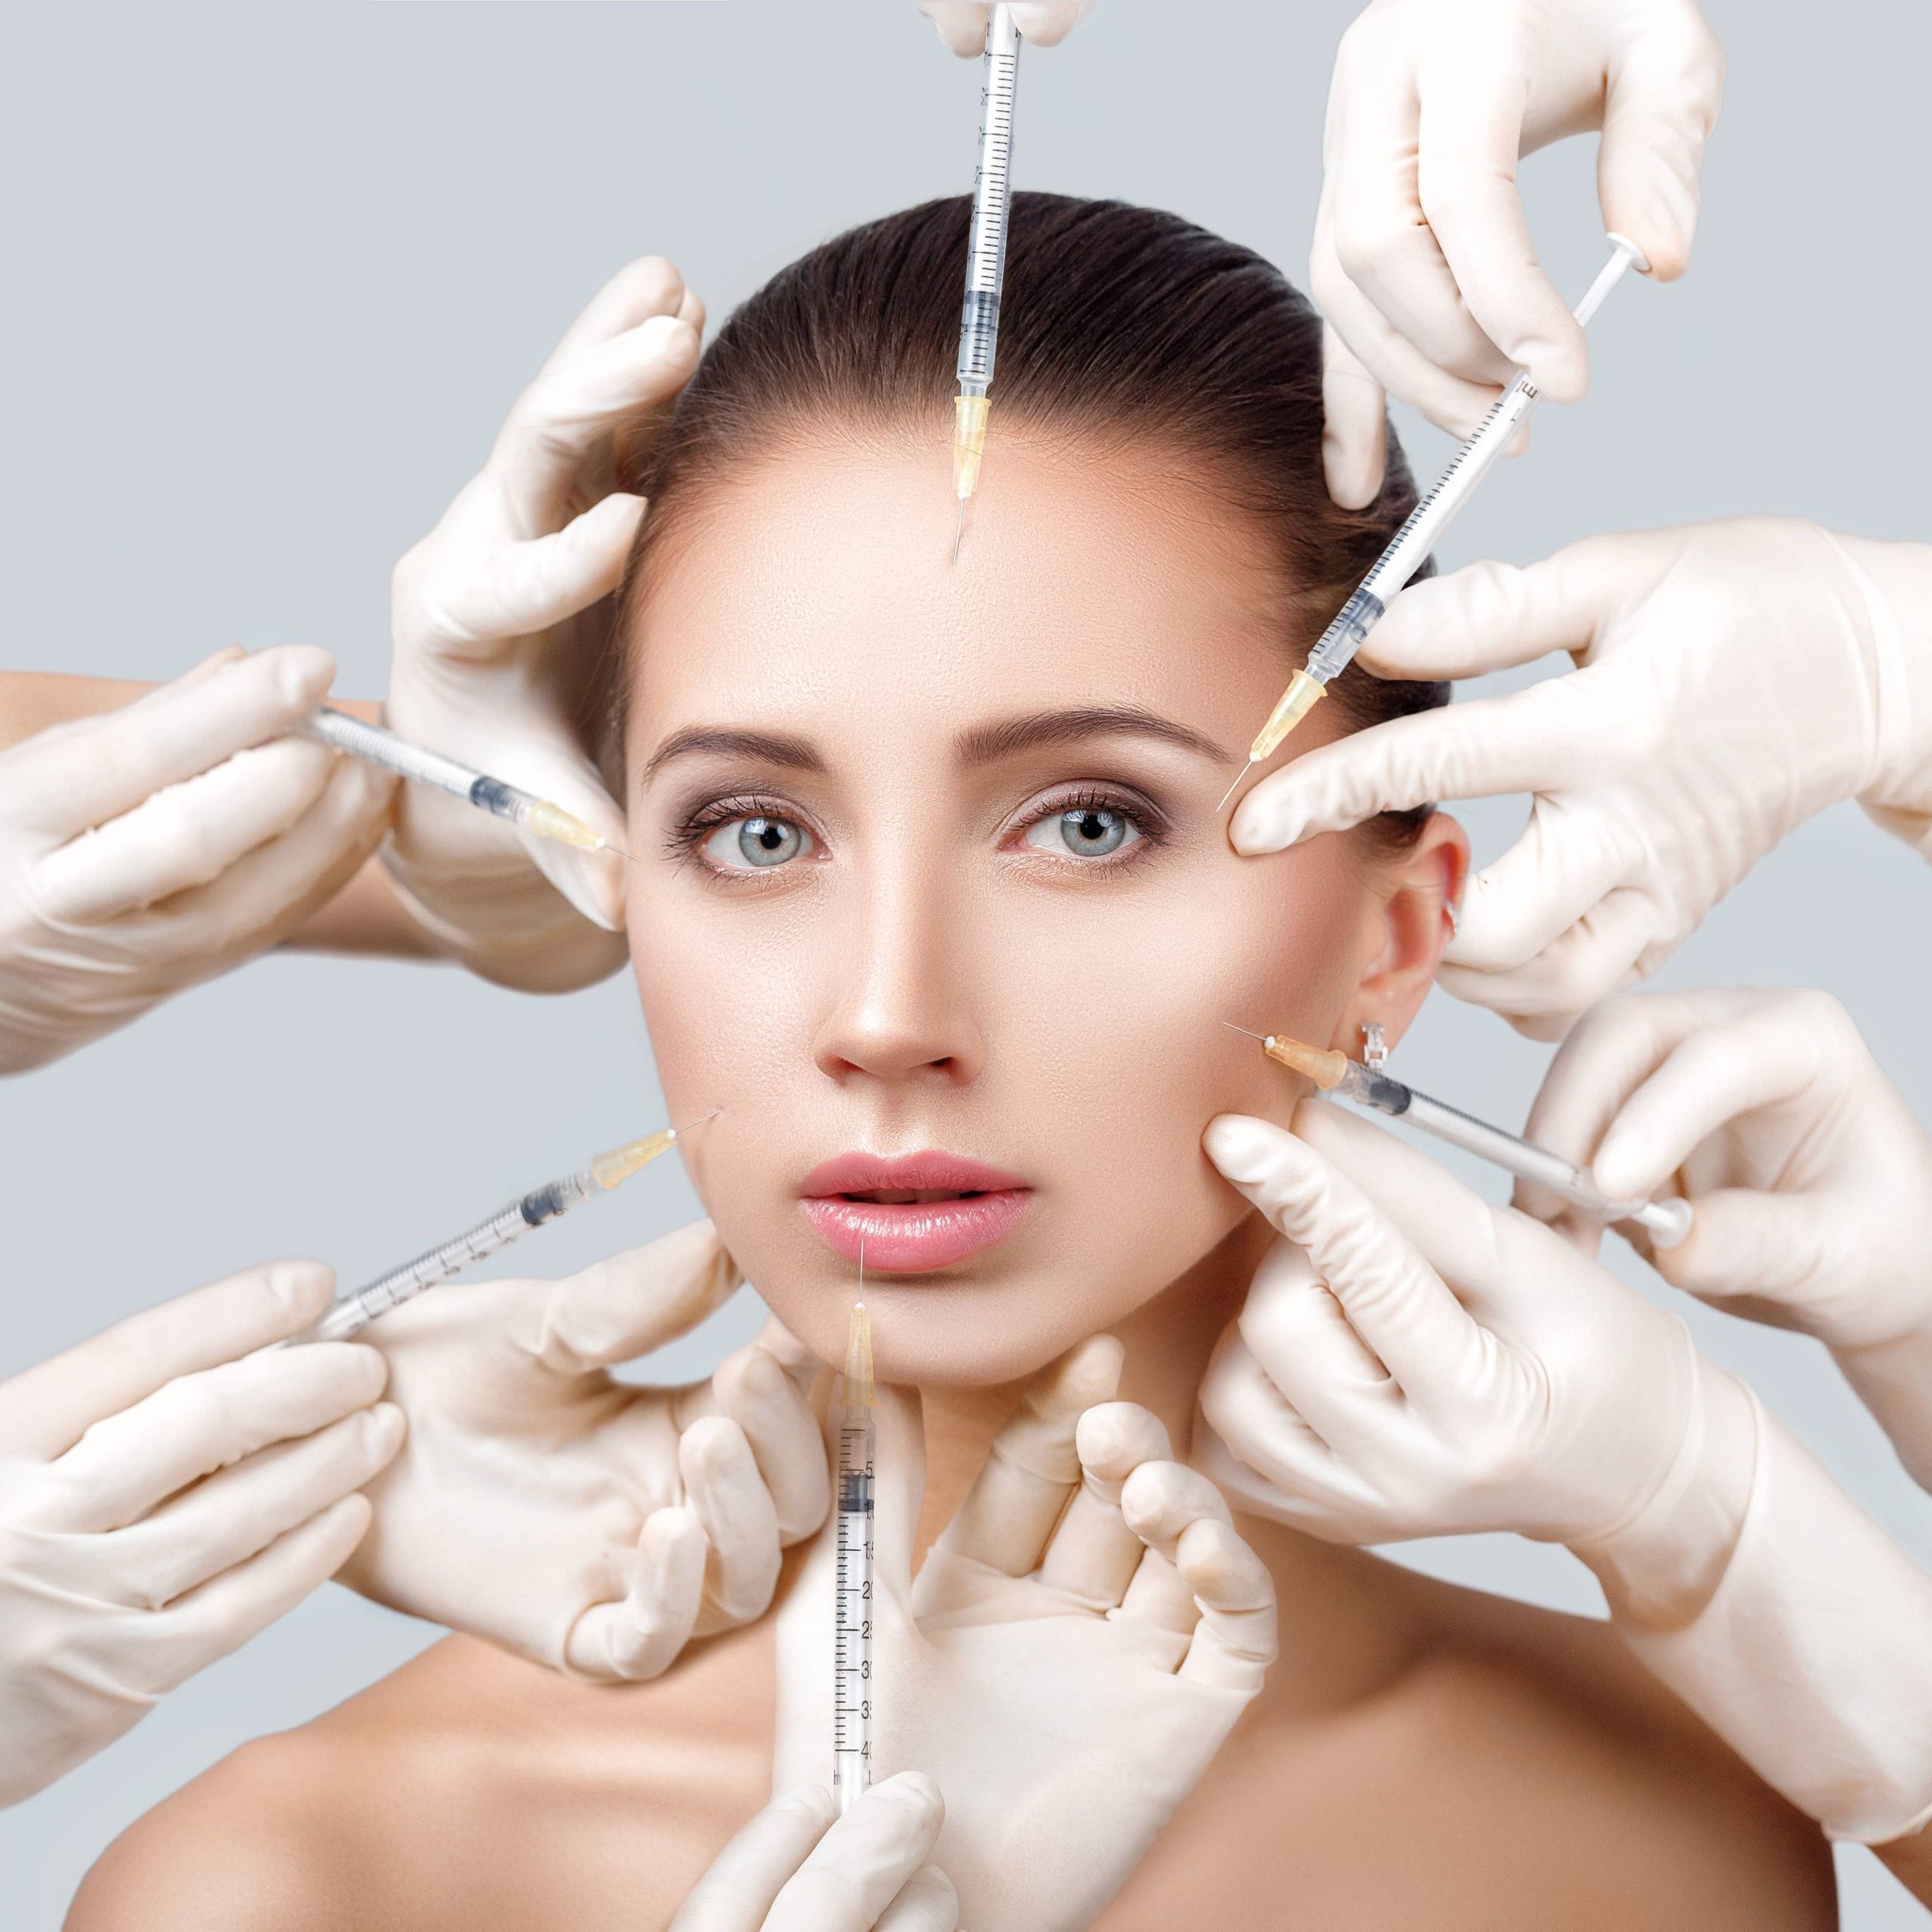 Plastic Surgery Horrors: Risks and Complications You Face When Going Under the Knife